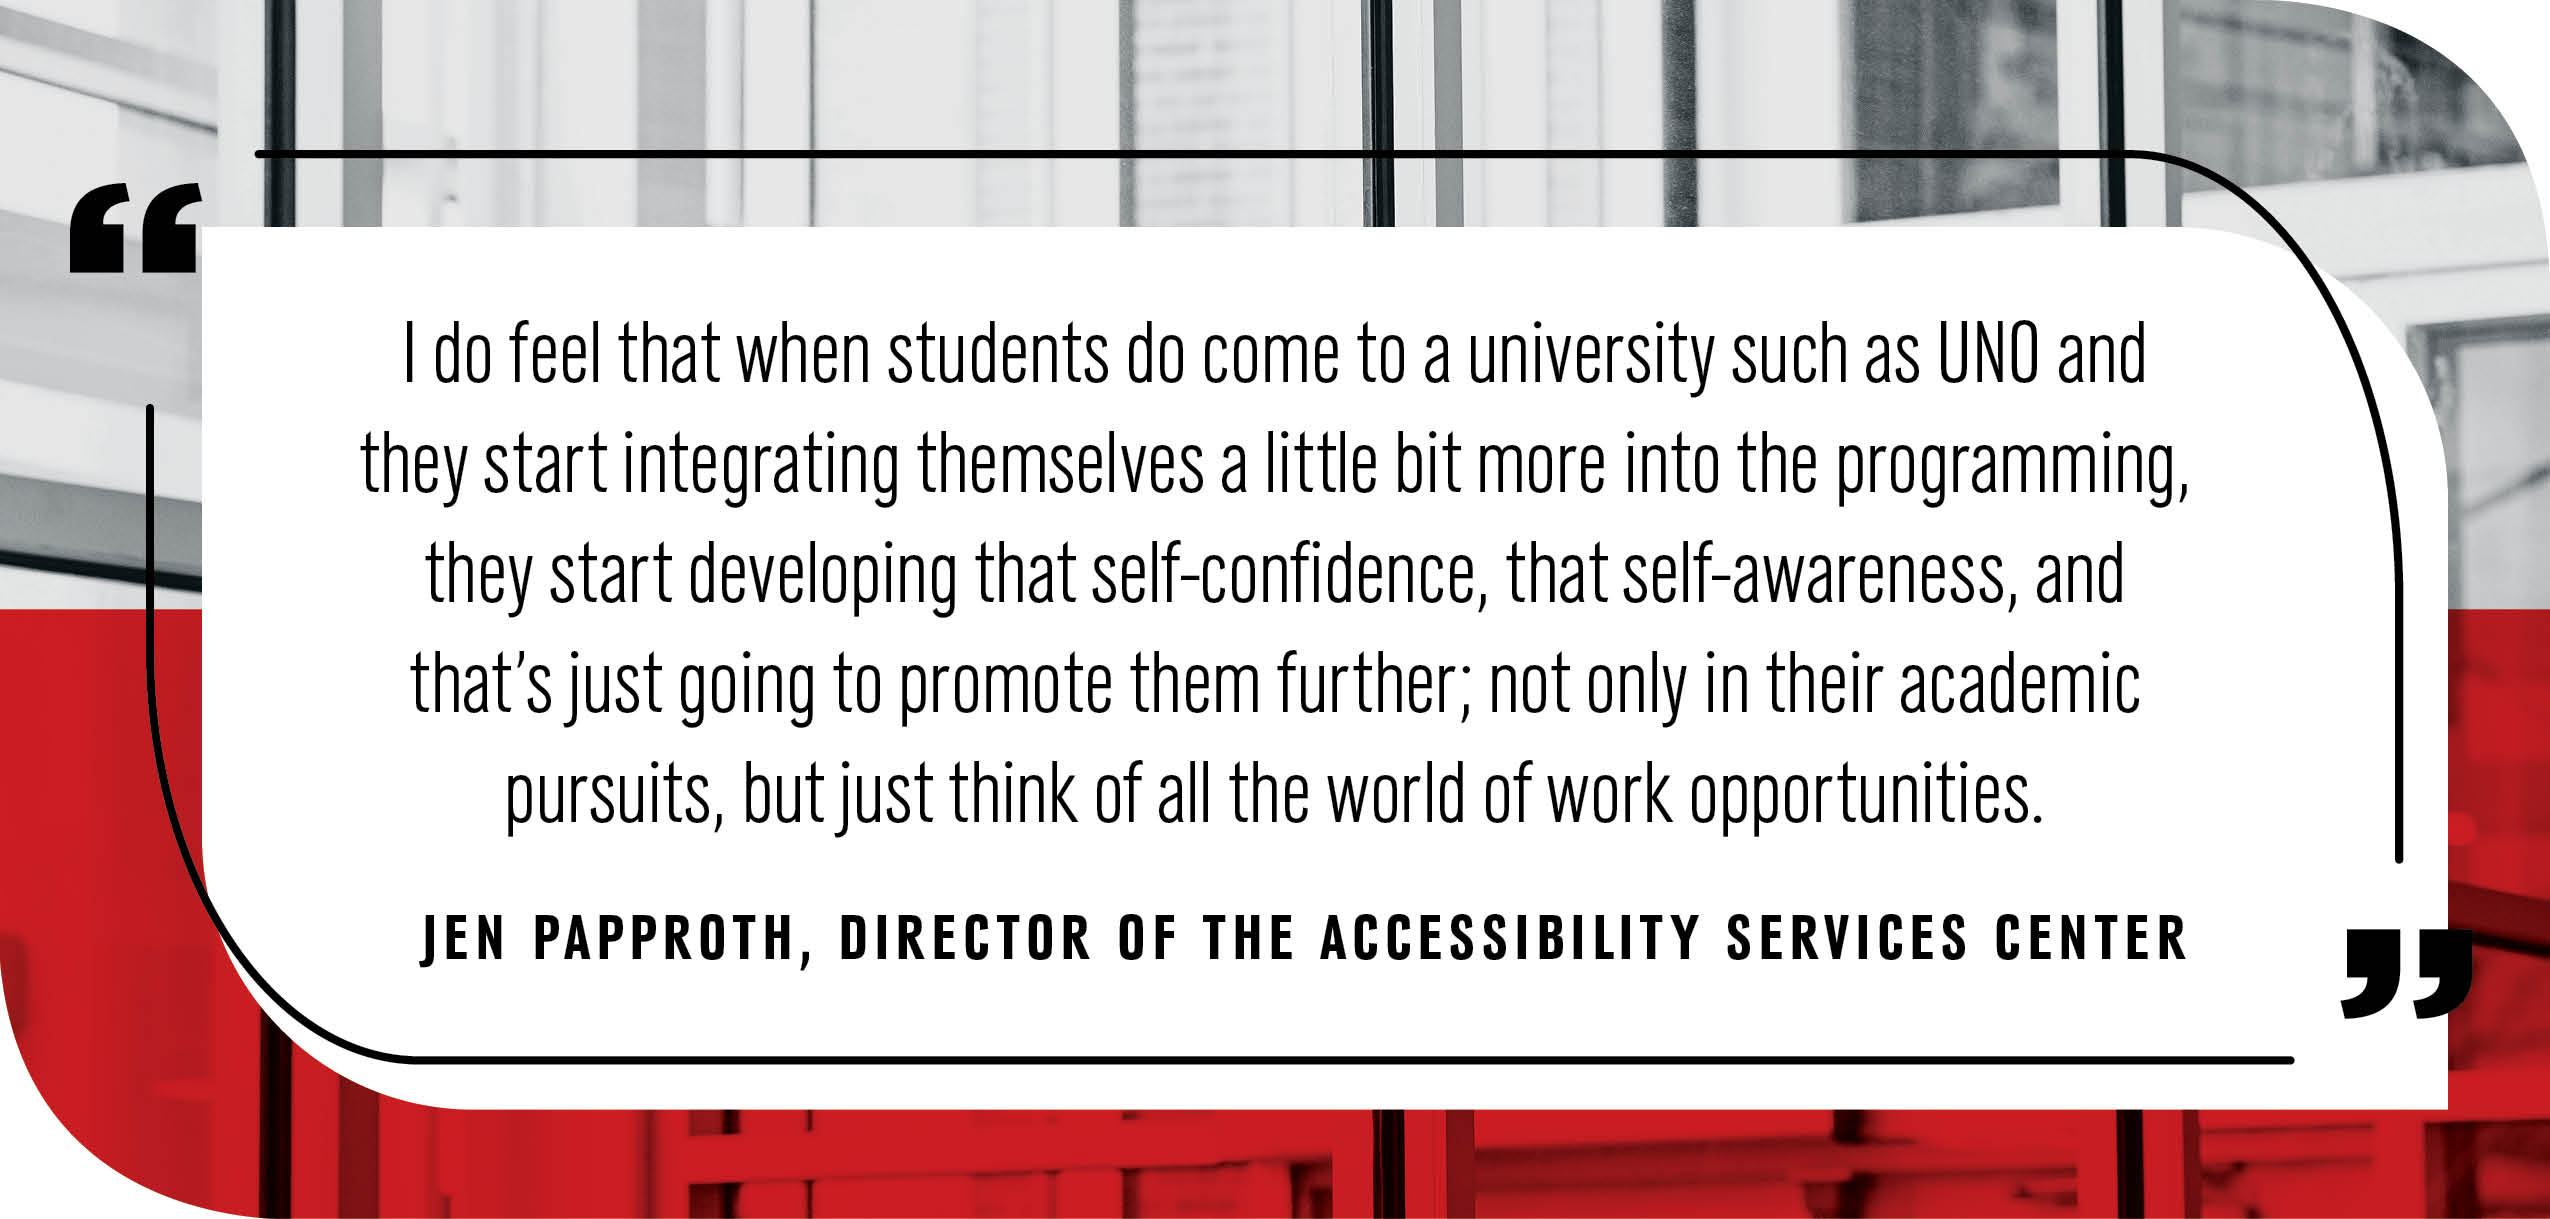 Quote by Jen Papproth, Director of the Accessibility Services Center: "I do feel that when students do come to a university such as UNO and they start integrating themselves a little bit more into the programing, they start developing that self-confidence, that self-awareness, and that's just going to promote them further; not only in their academic pursuits, but just think of all the world of work opportunities."